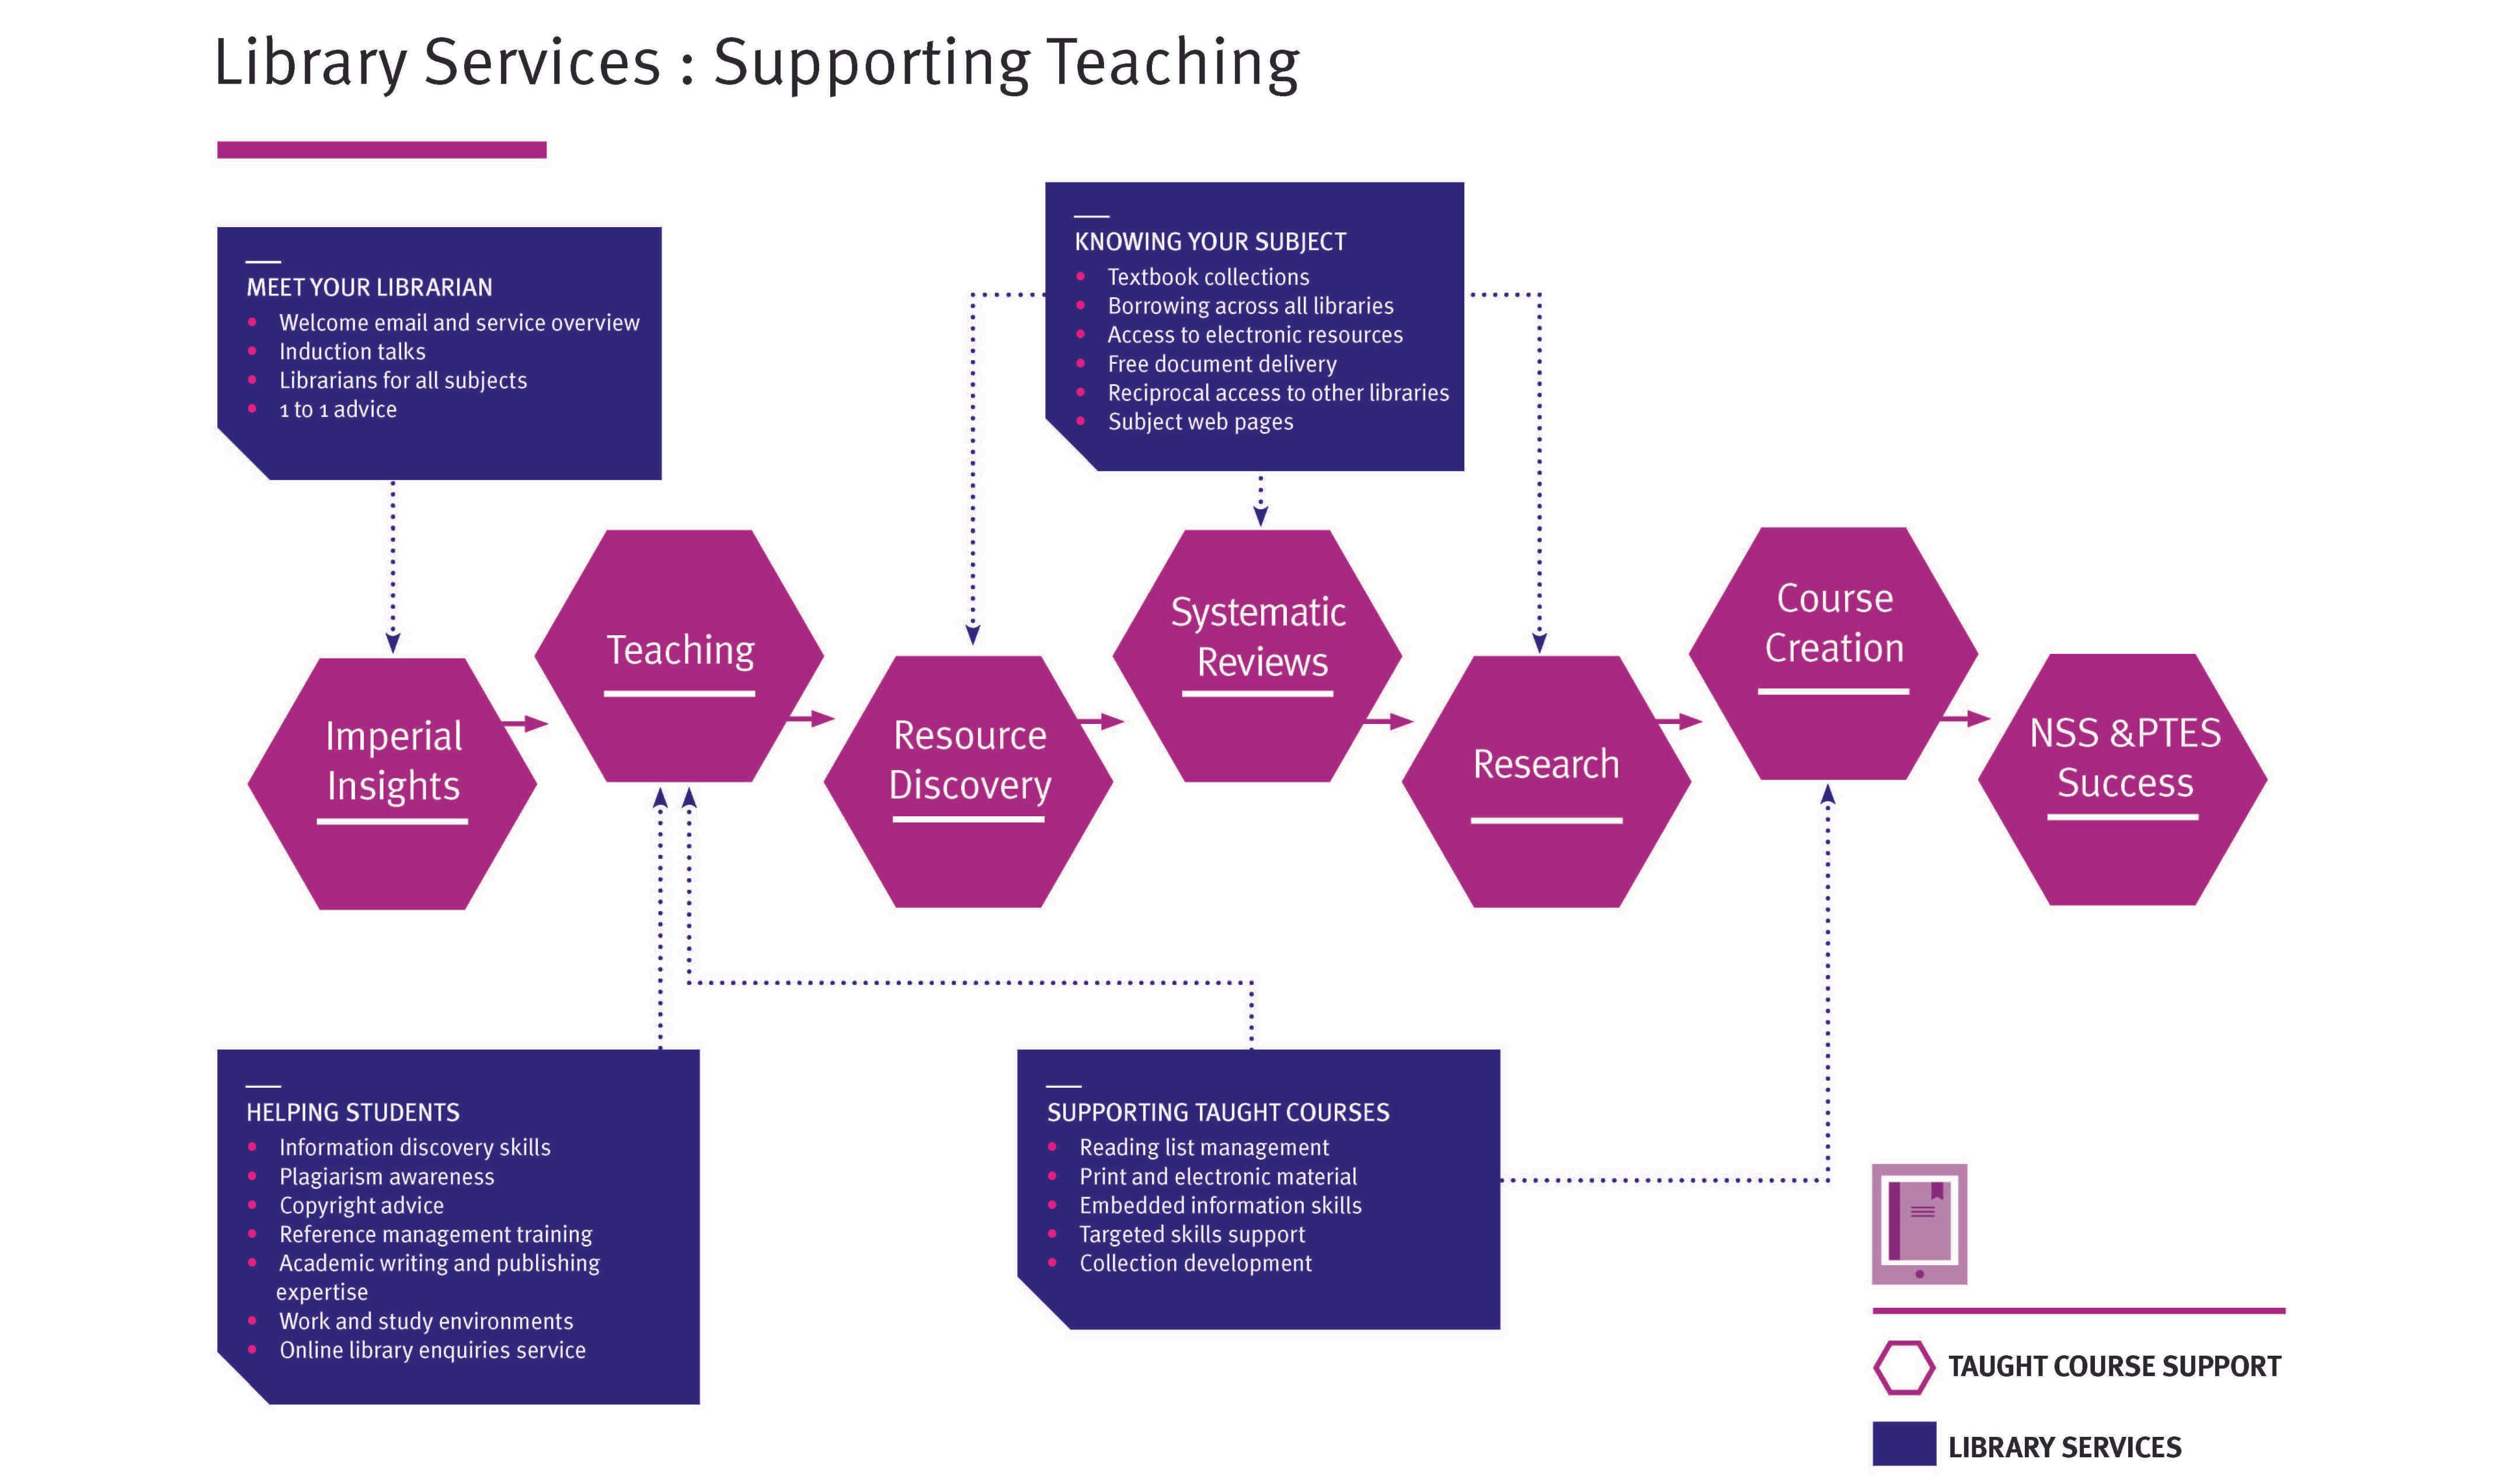 Teaching support